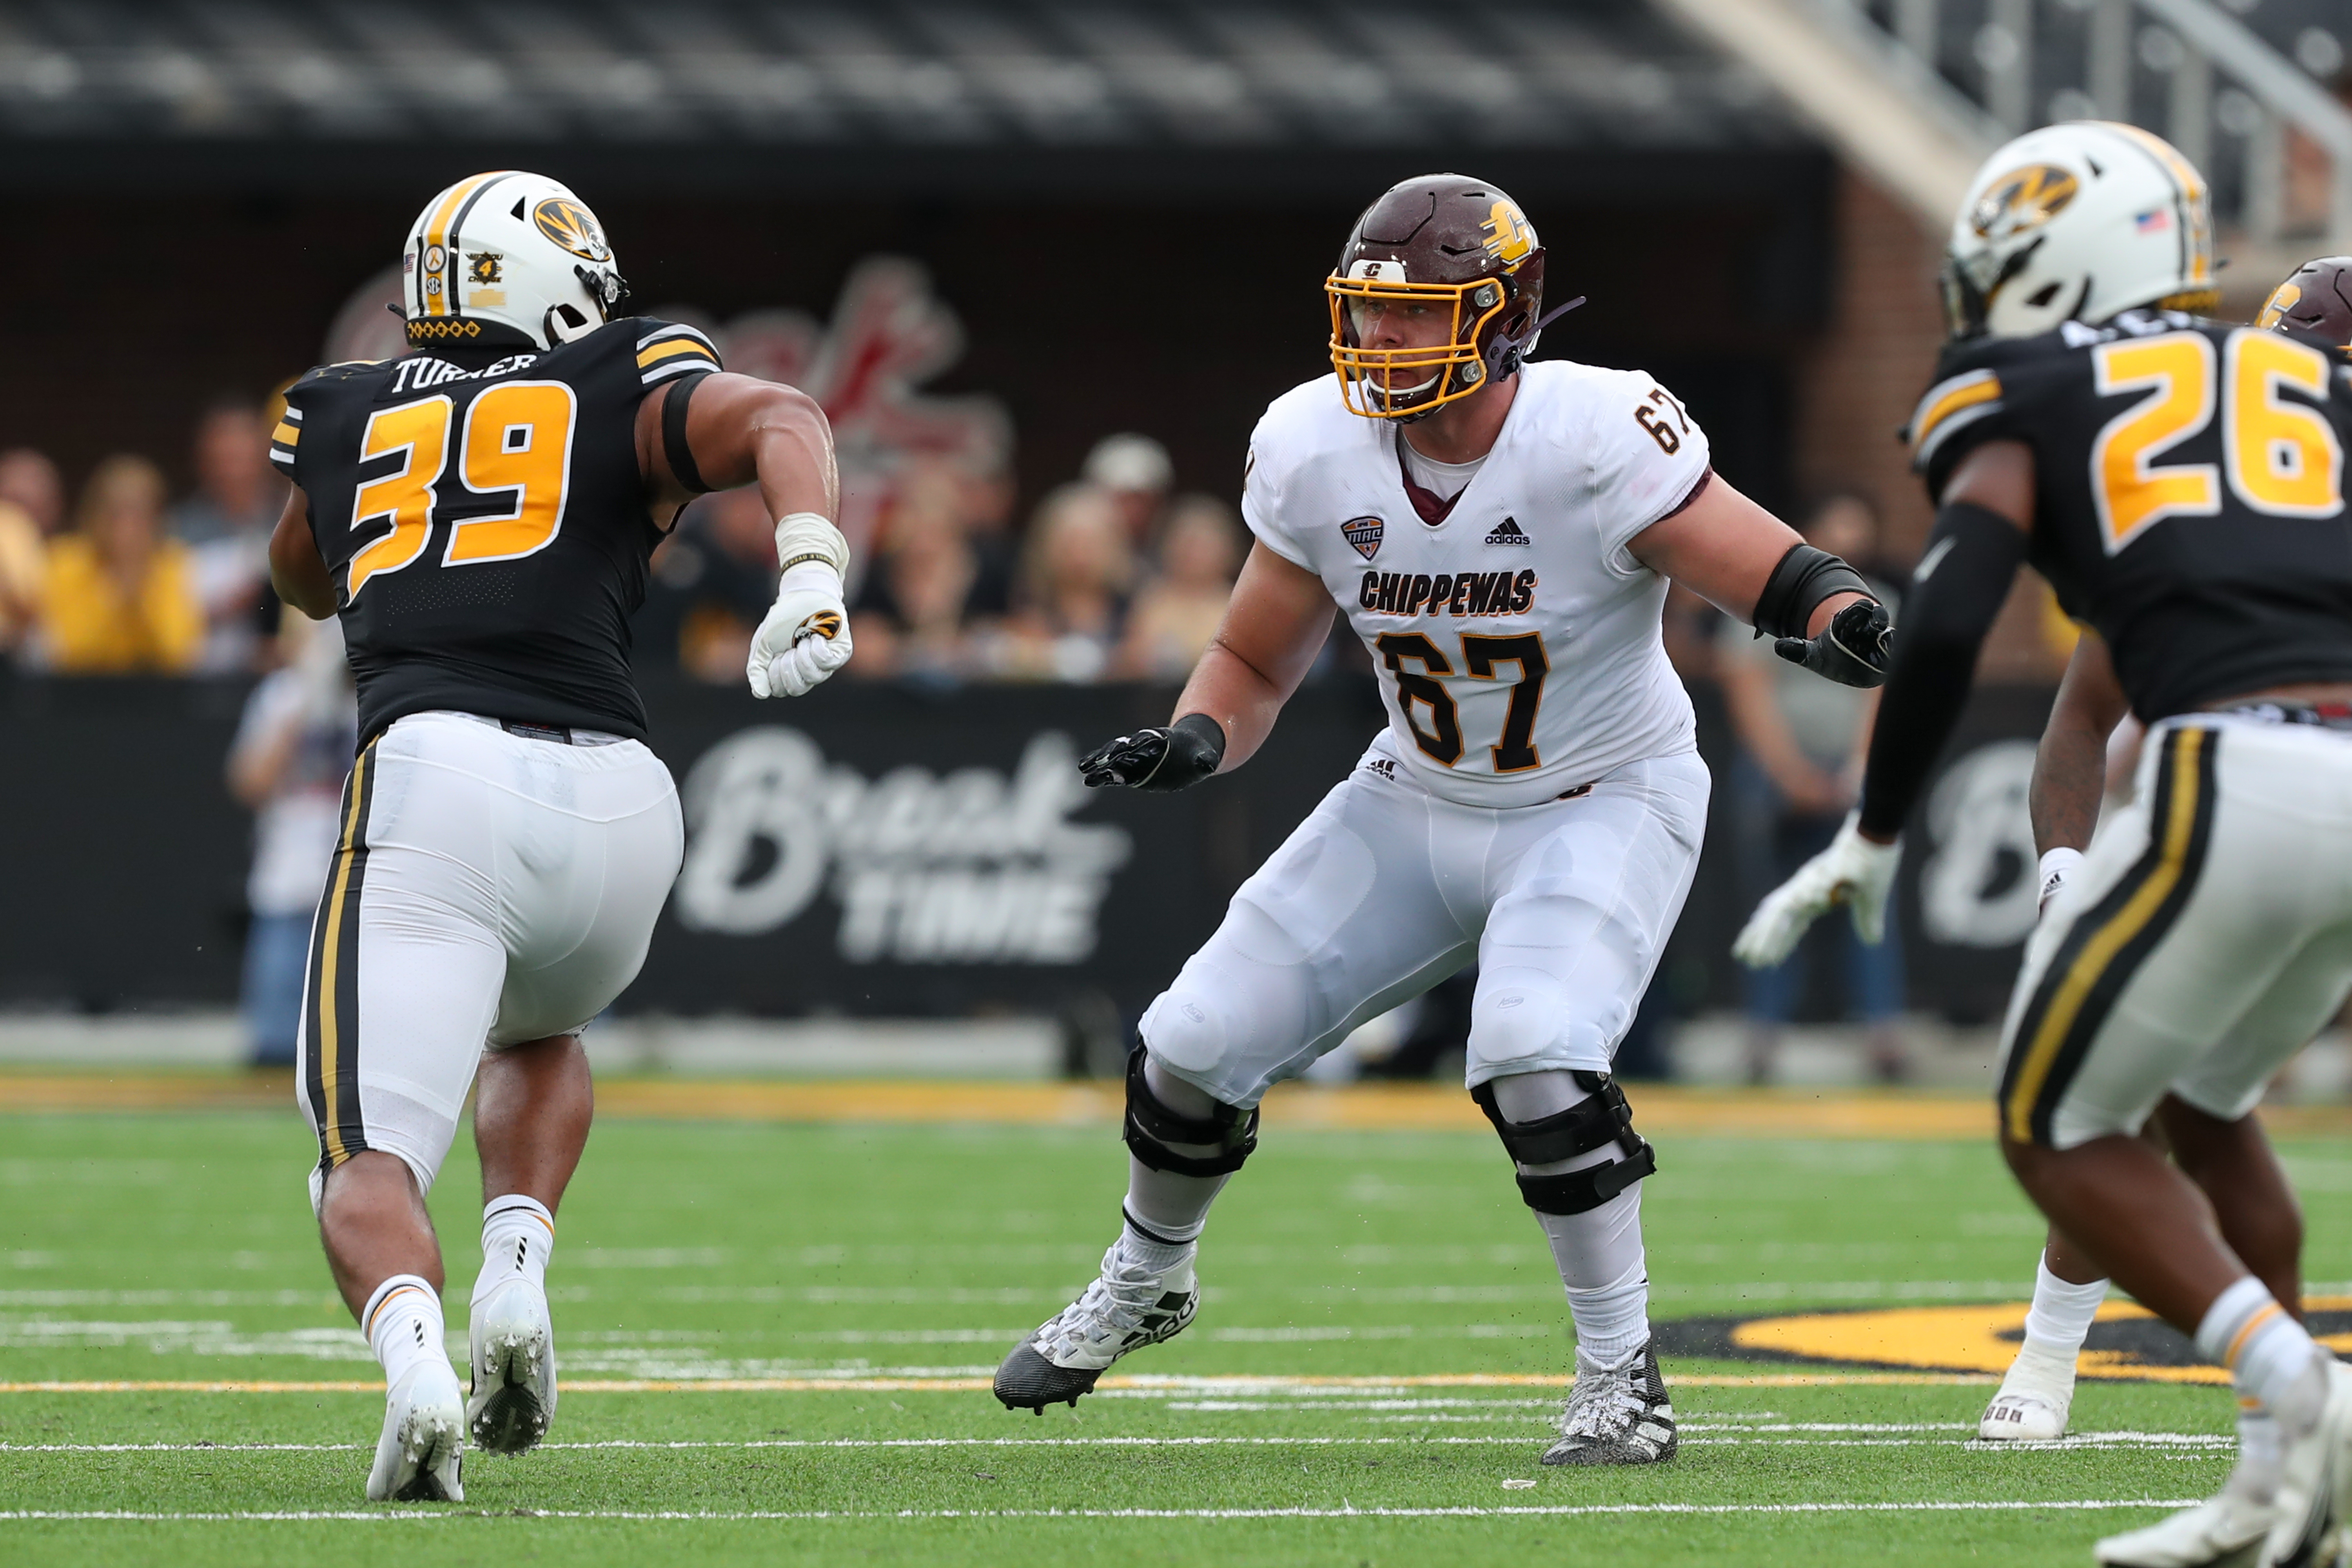 Central Michigan Chippewas offensive lineman Luke Goedeke (67) looks to block Central Michigan Chippewas linebacker Ke’Shon Parker (39) in the second quarter of a college football game between the Central Michigan Chippewas and Missouri Tigers on Sep 4, 2021 at Memorial Stadium at Faurot Field in Columbia, MO.